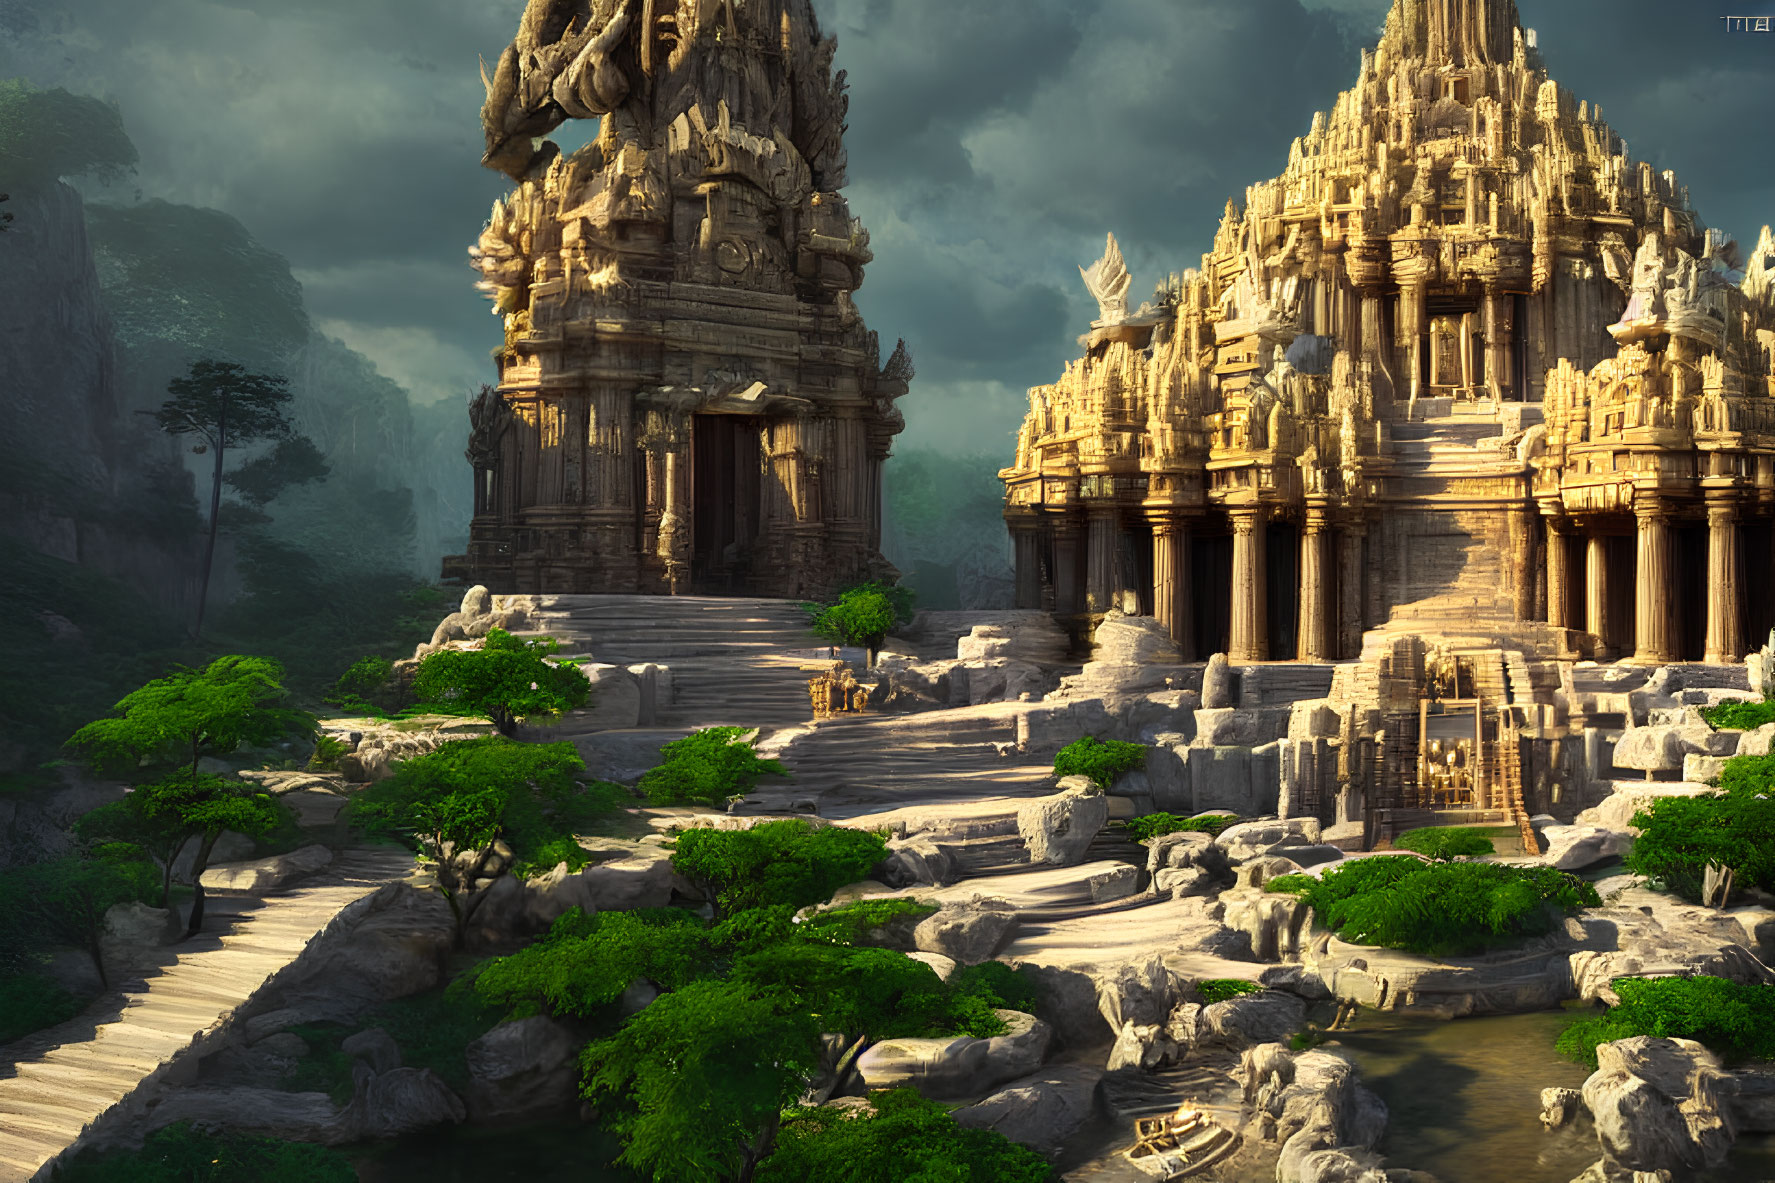 Ancient temple with lush greenery, stone steps, and misty mountains